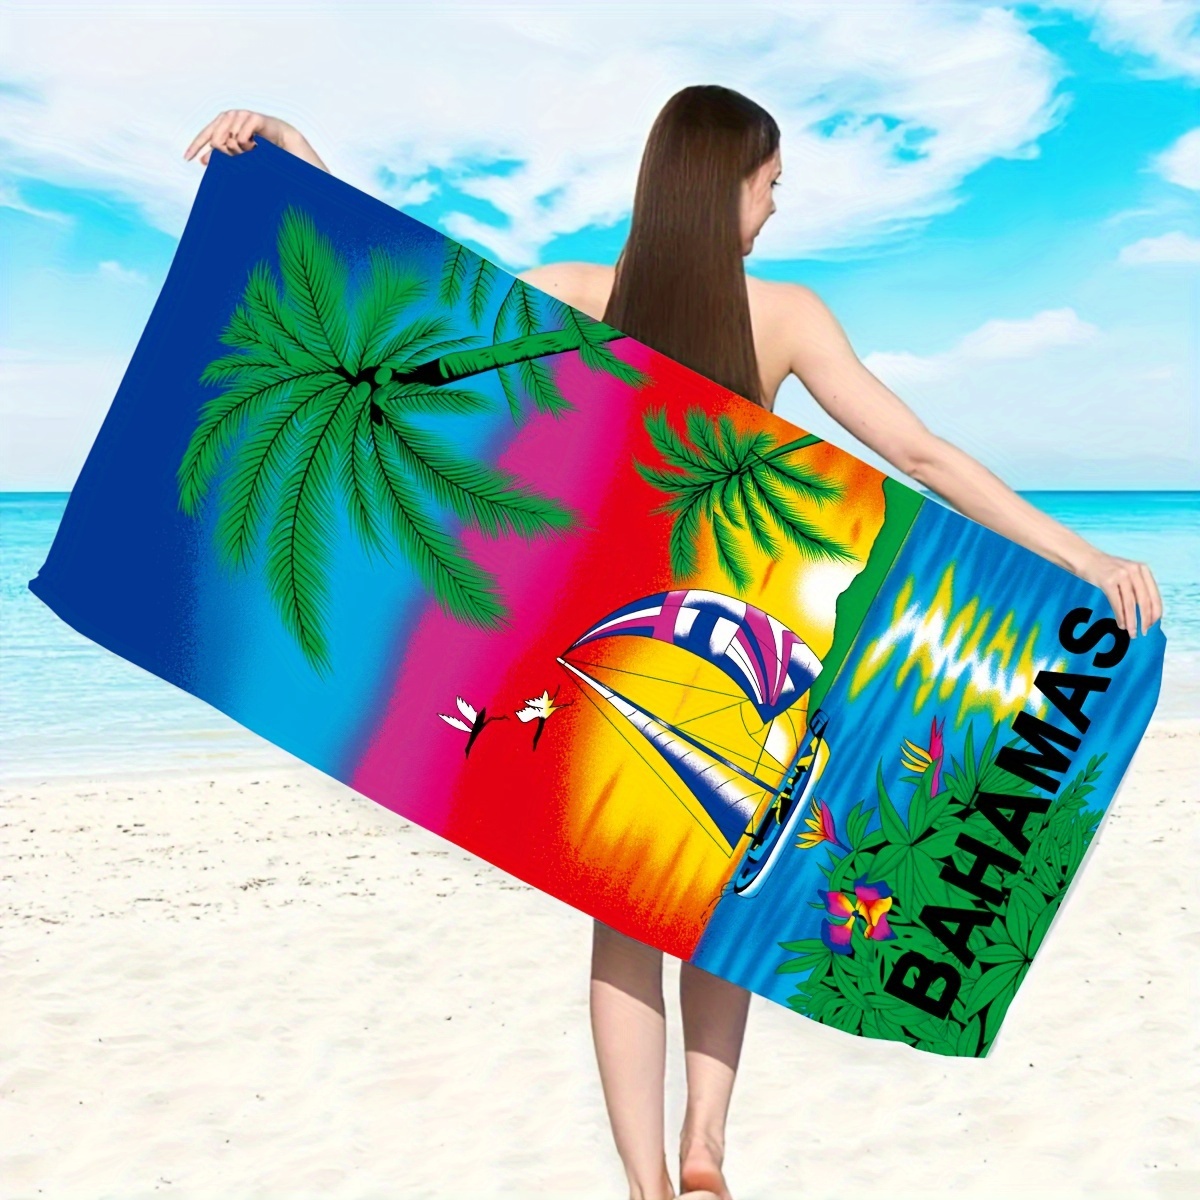 

1pc Bahamas Island Scenery Beach Towel, Lightweight, Ultra-soft, And Highly Absorbent, Stylish Beach Towel, Ideal For Pool Vacation Holiday Beach, Perfect For Summer Fun And Relaxation